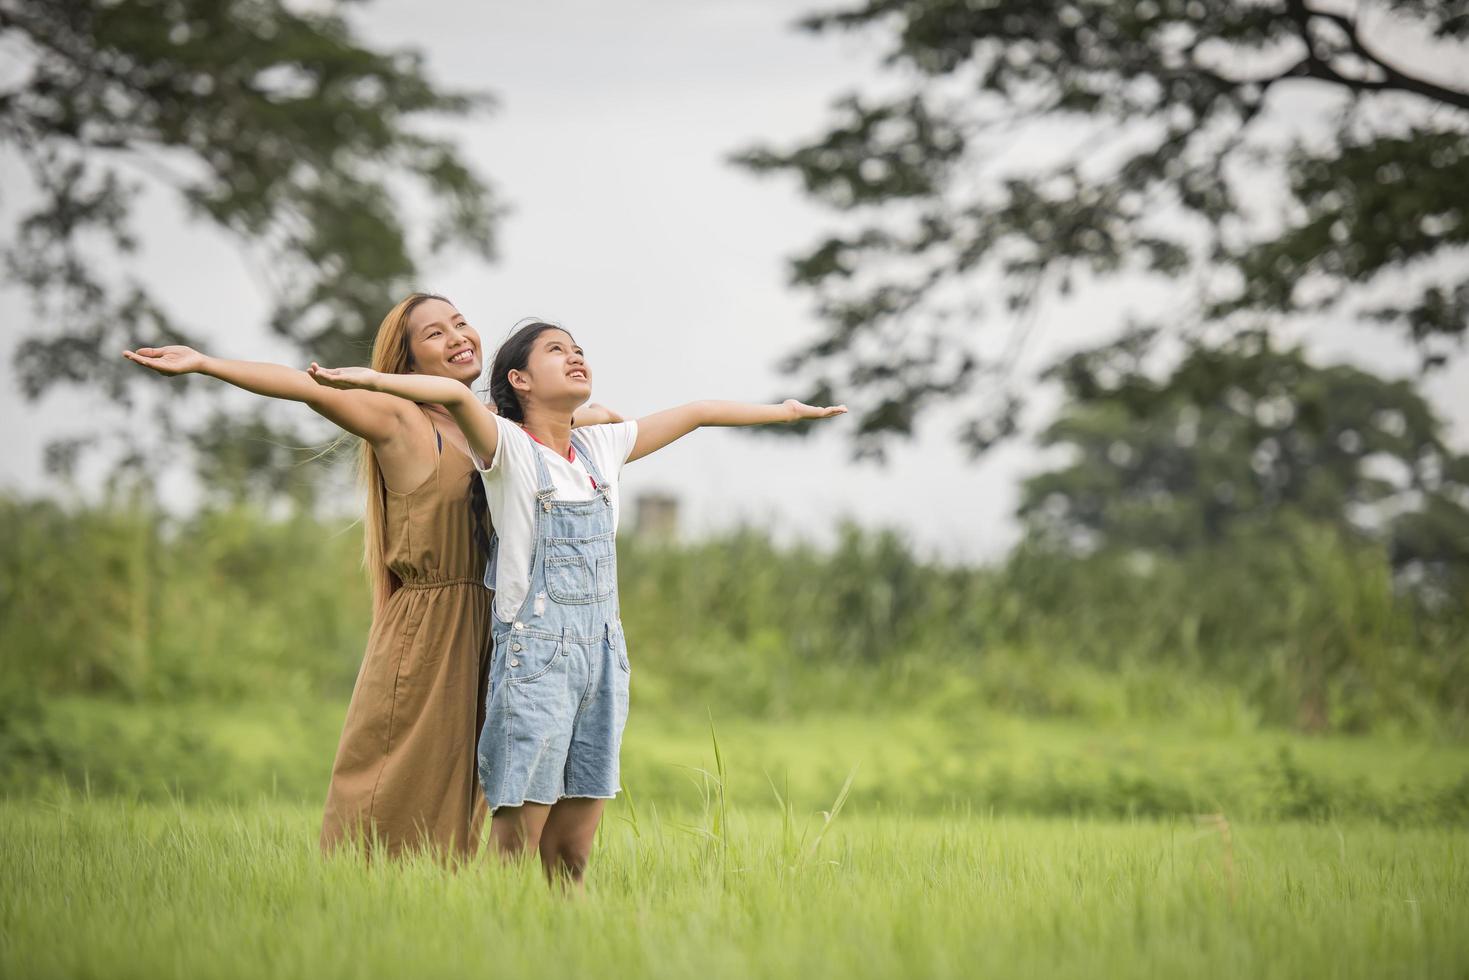 Mother and daughter standing happy in grass field photo